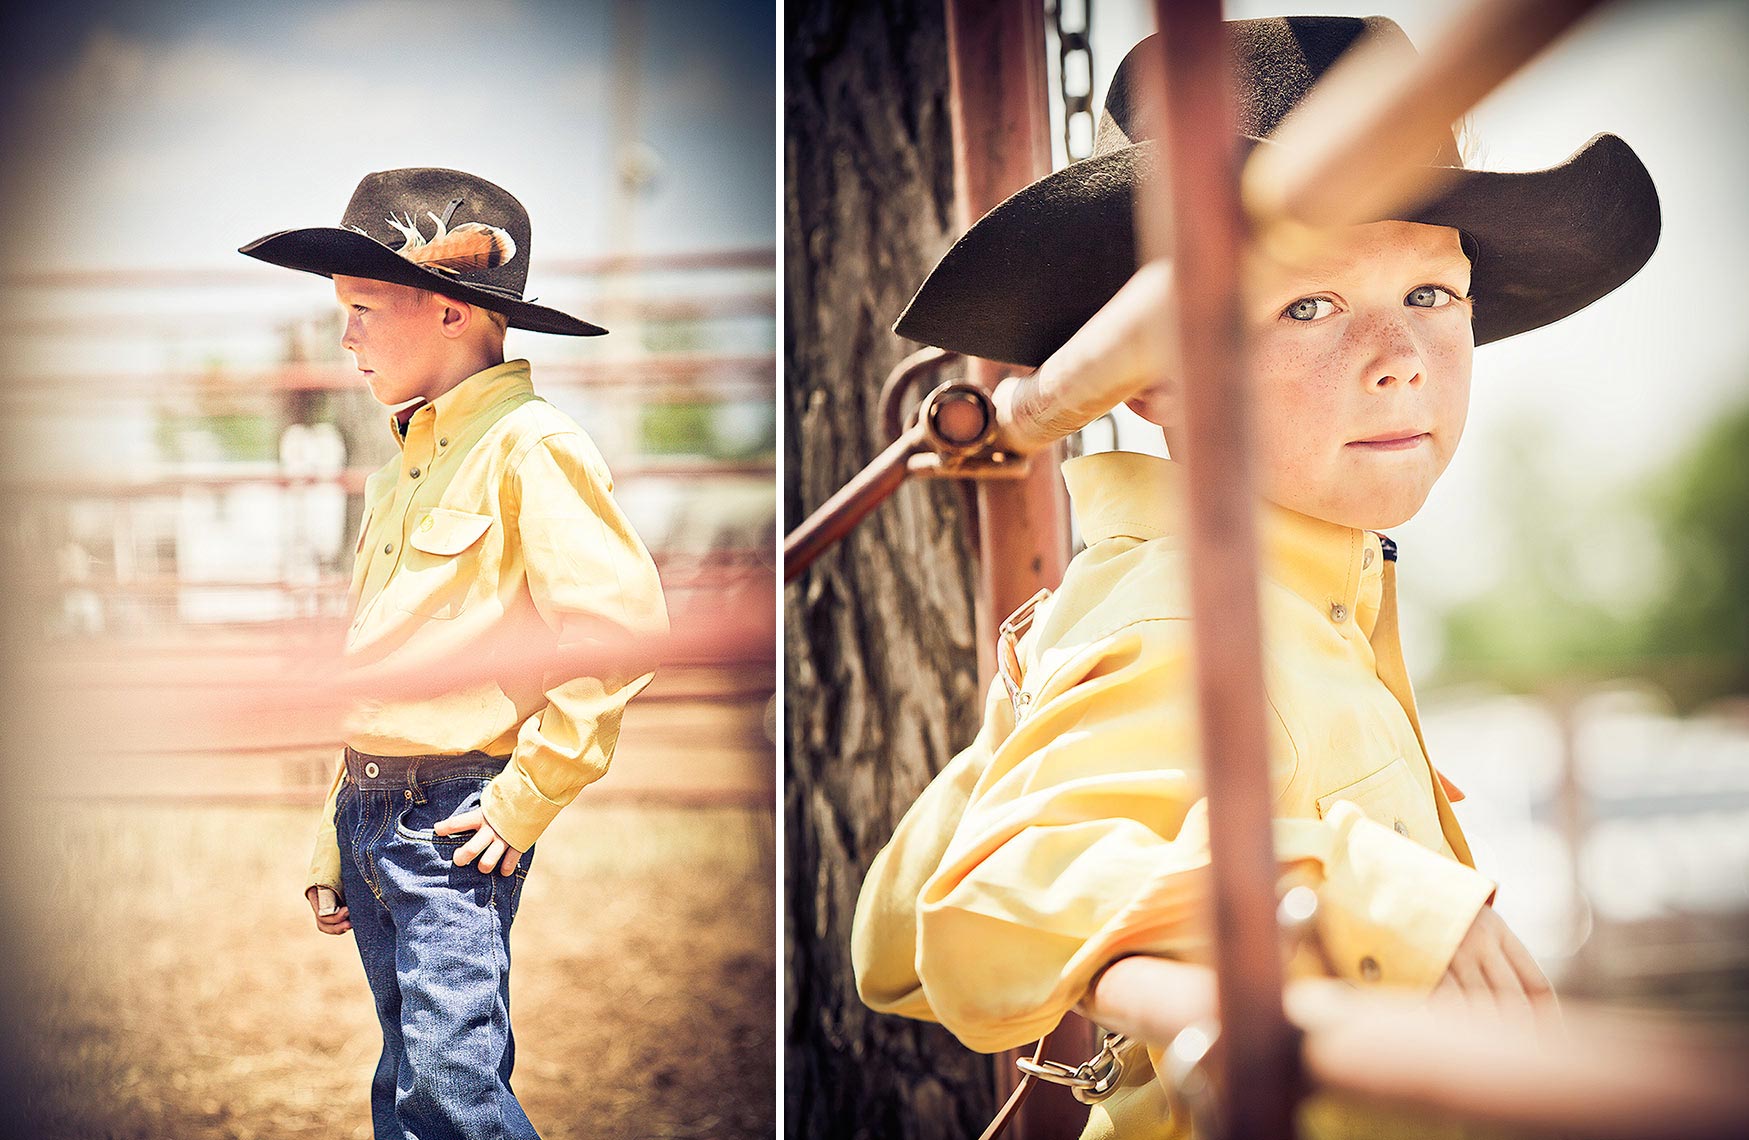 John Sibilski Photography | Trade show photography Chicago LITTLE BRITCHES RODEO 5